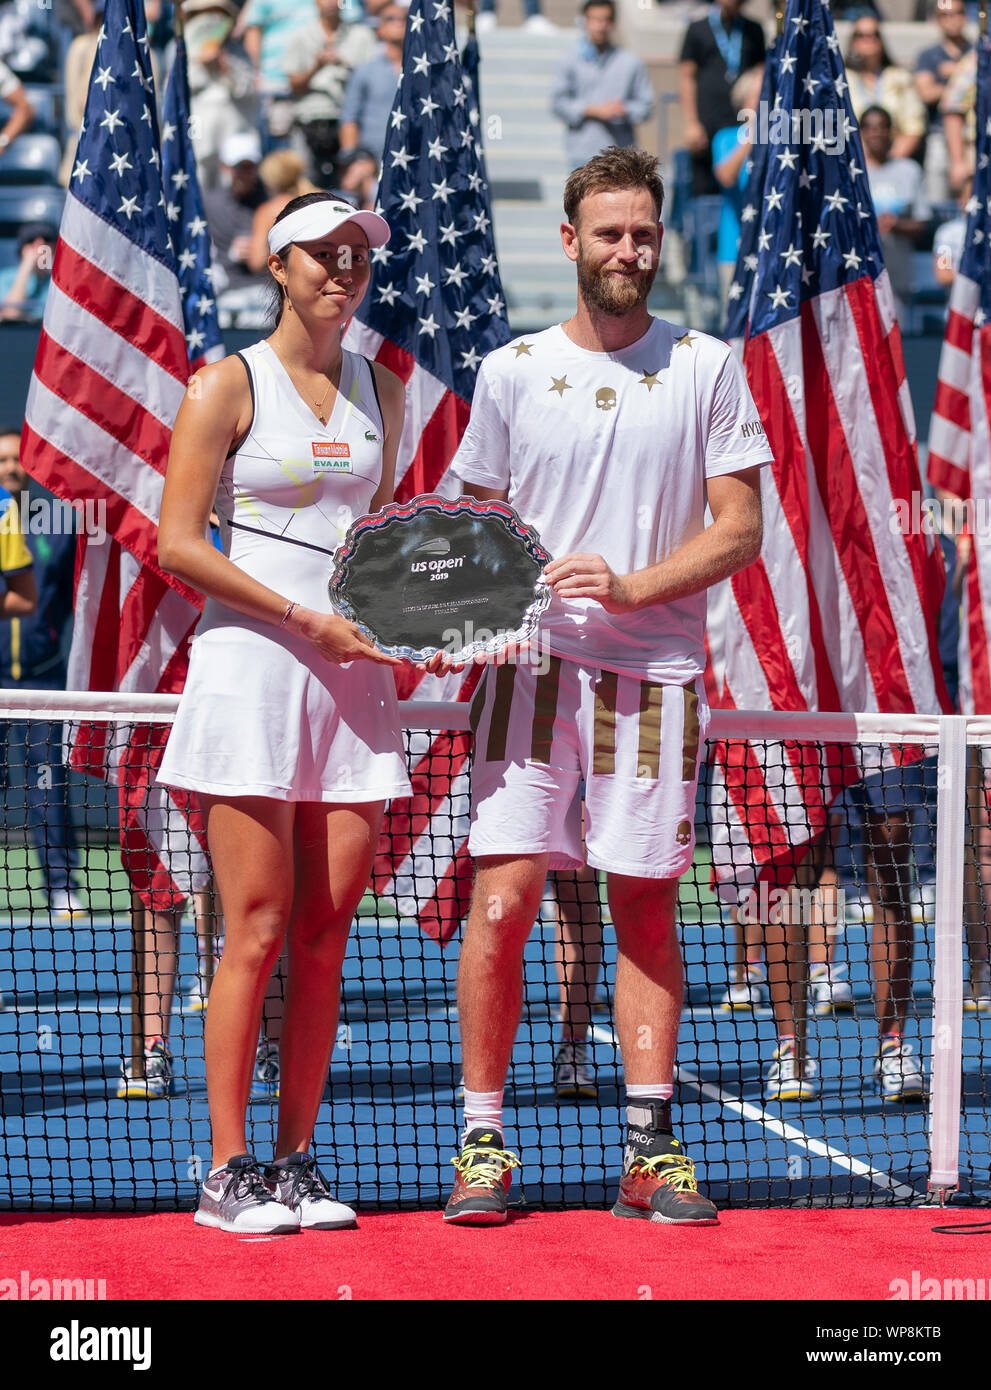 New York, United States. 07th Sep, 2019. Hao-Ching Chan (Taipei), Michael Venus (New Zeland) pose with runner-up trophy mixed doubles final match at US Open Championships at Billie Jean King National Tennis Center (Photo by Lev Radin/Pacific Press) Credit: Pacific Press Agency/Alamy Live News Stock Photo